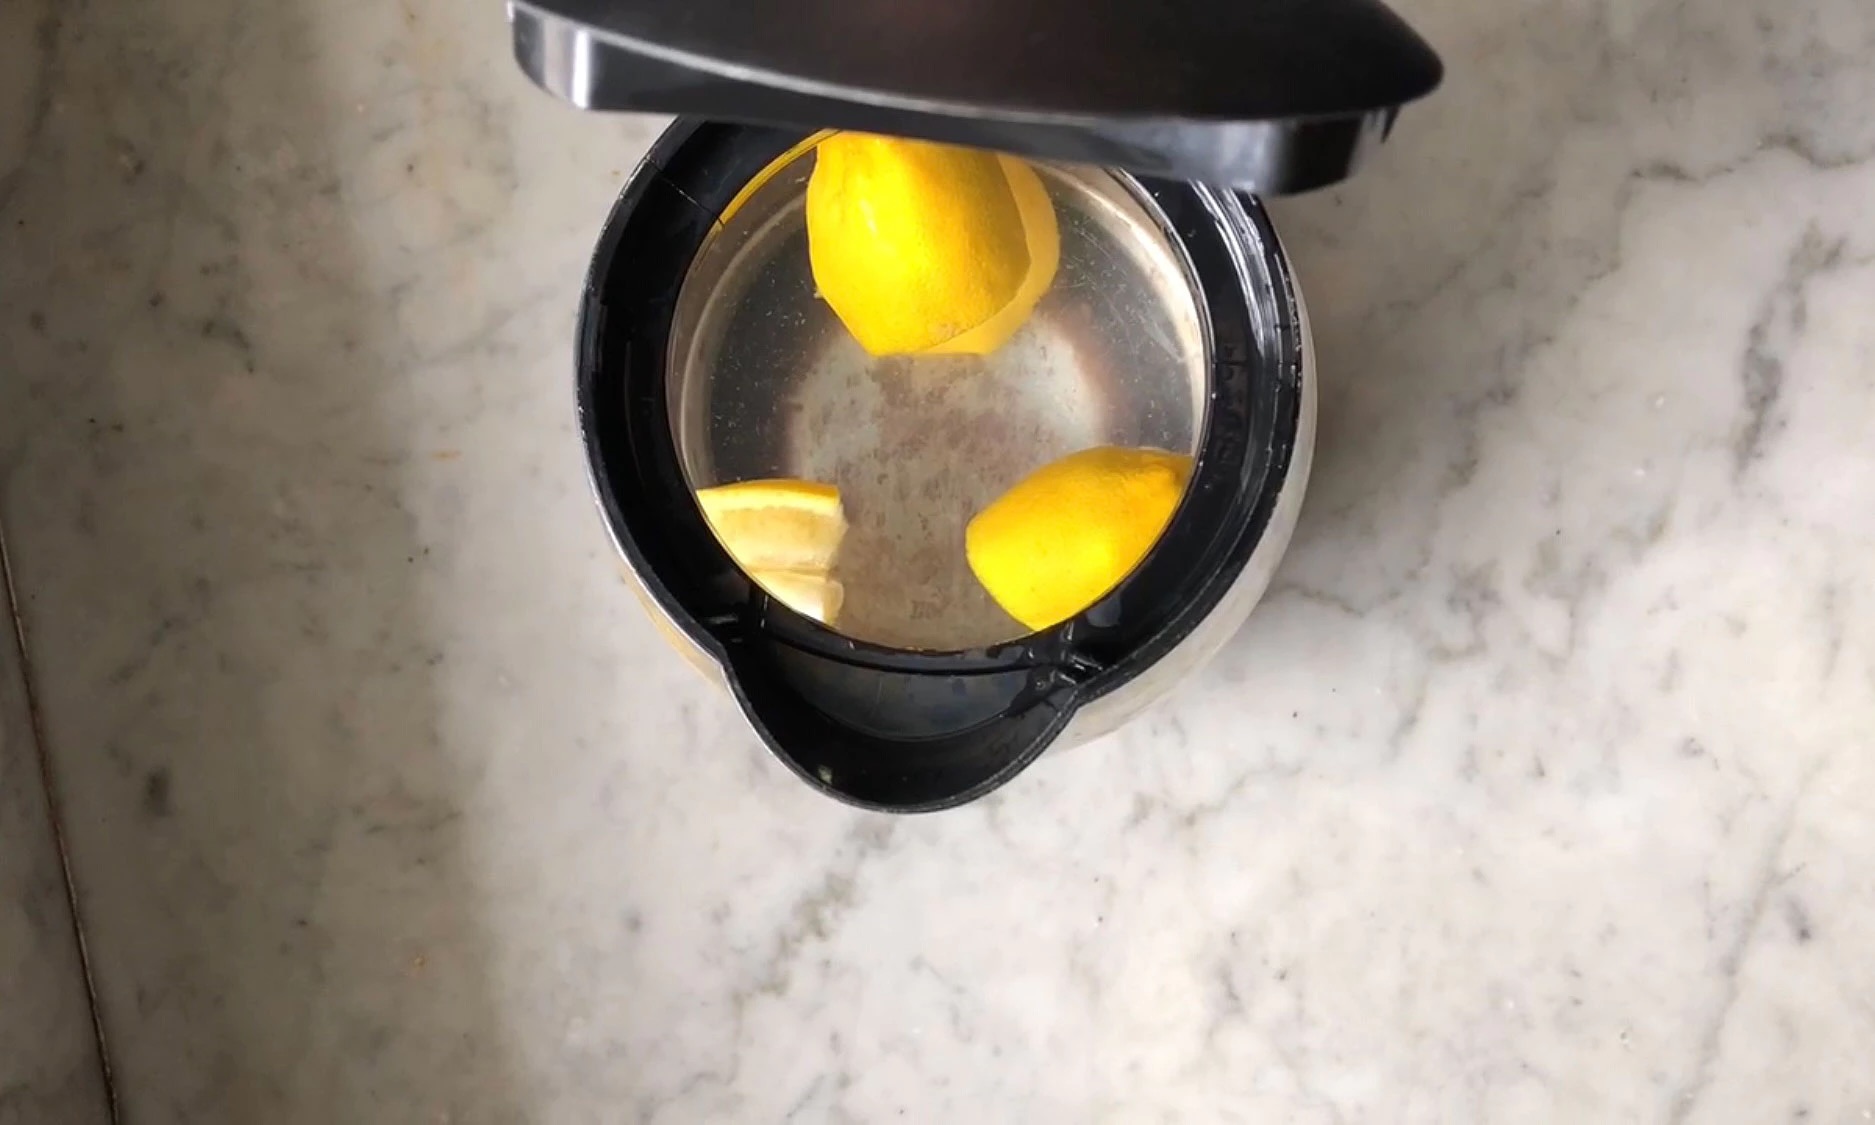 How To Clean A Kettle With Lemon